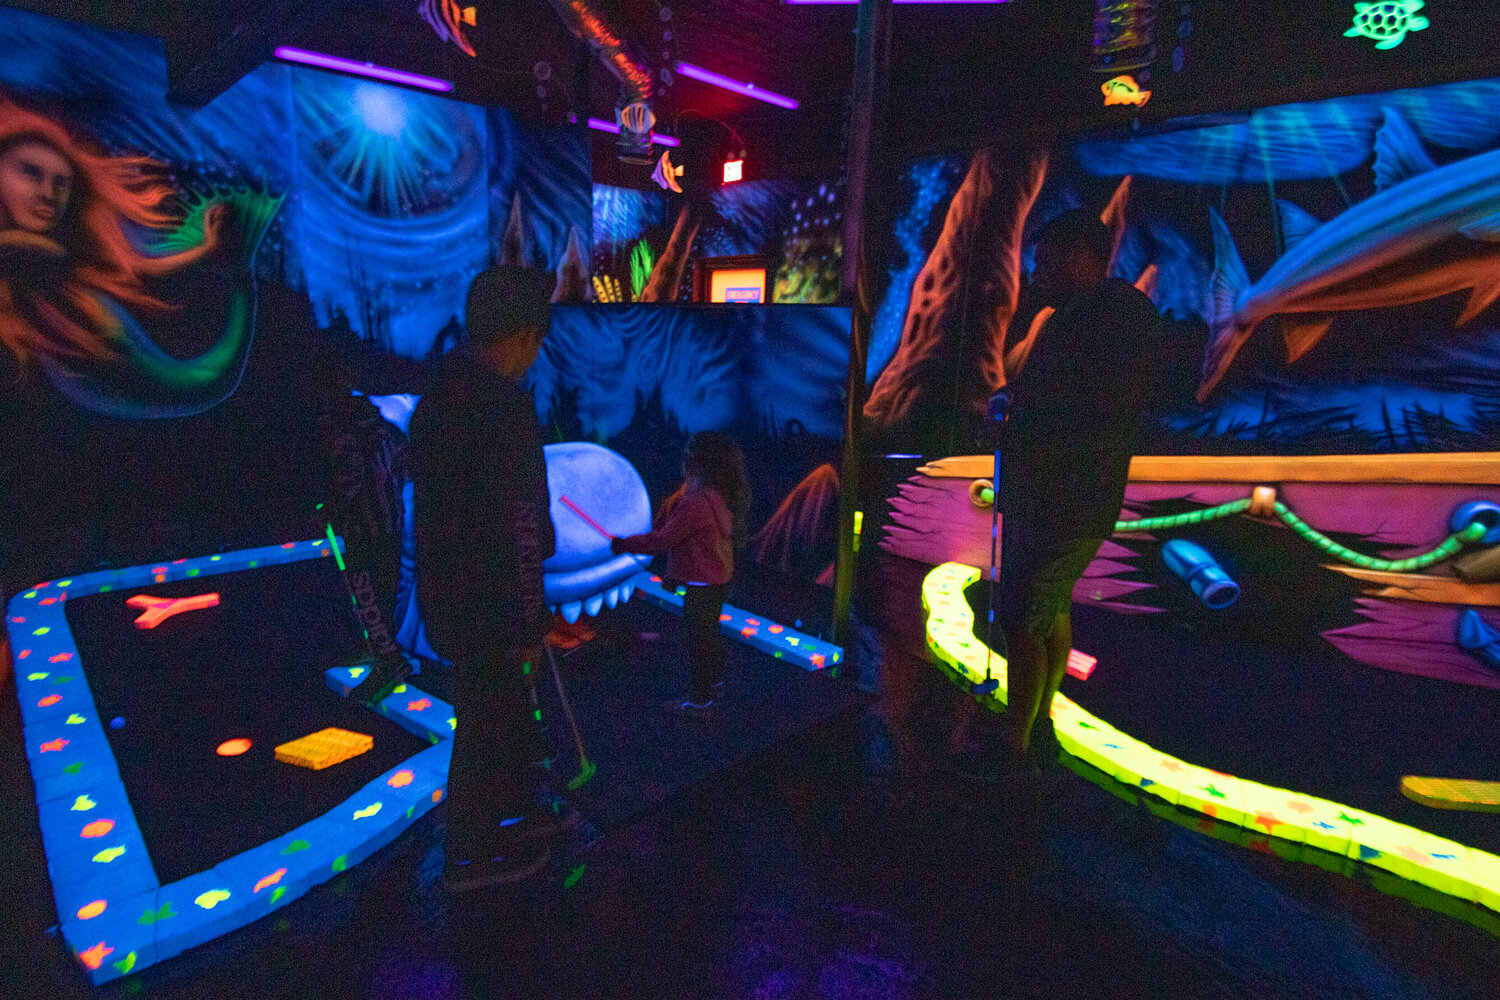 A family enjoys a round of black light mini golf at Shankz, which reopened on Aug. 20 after being forced to move from its old location at the Yard Birds mall last November.